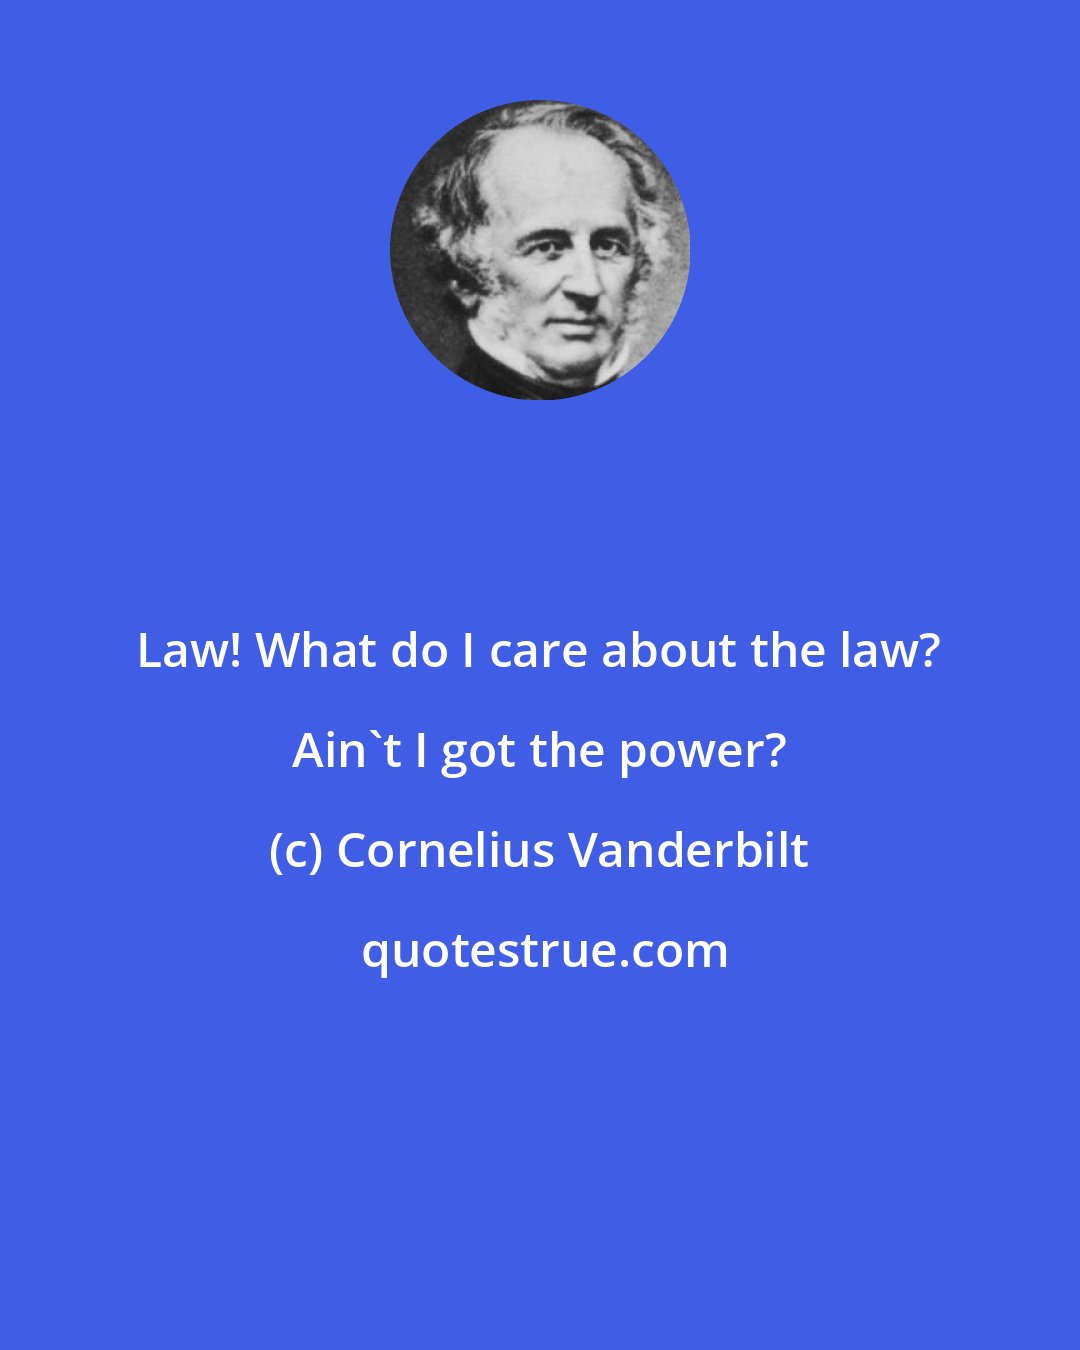 Cornelius Vanderbilt: Law! What do I care about the law? Ain't I got the power?